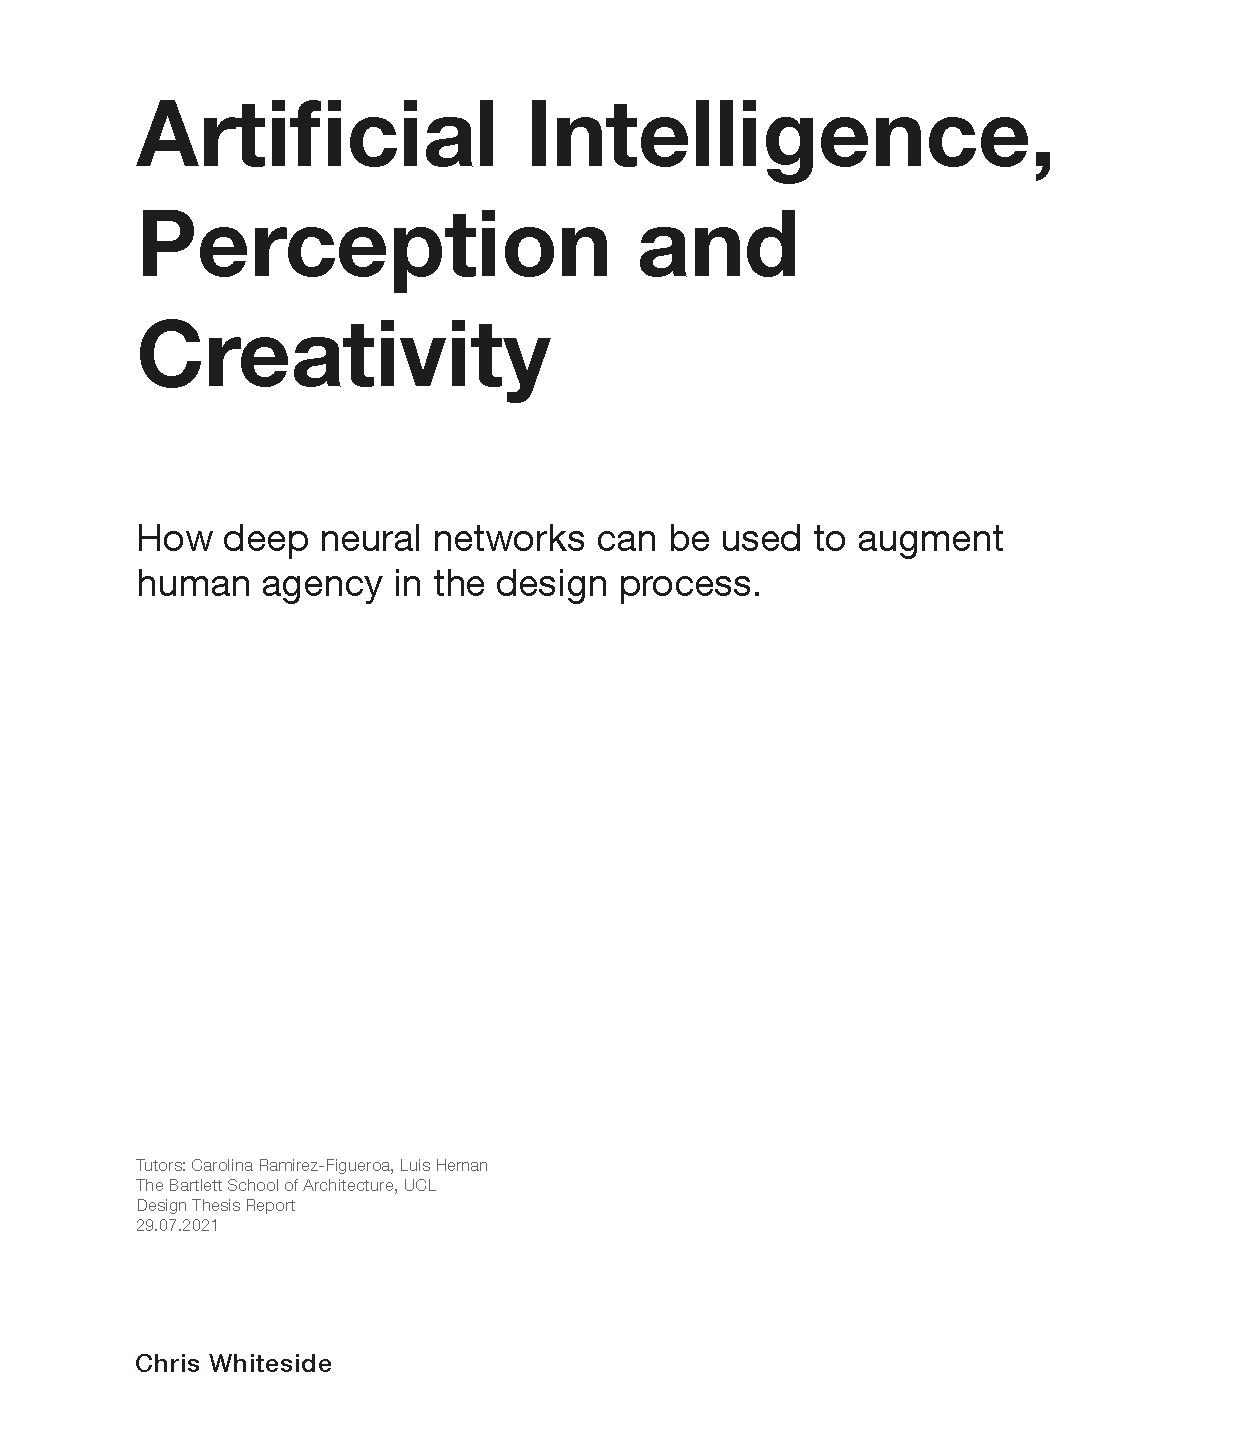 AI Perception and Creativity_Chris Whiteside_8mb_Page_01.png